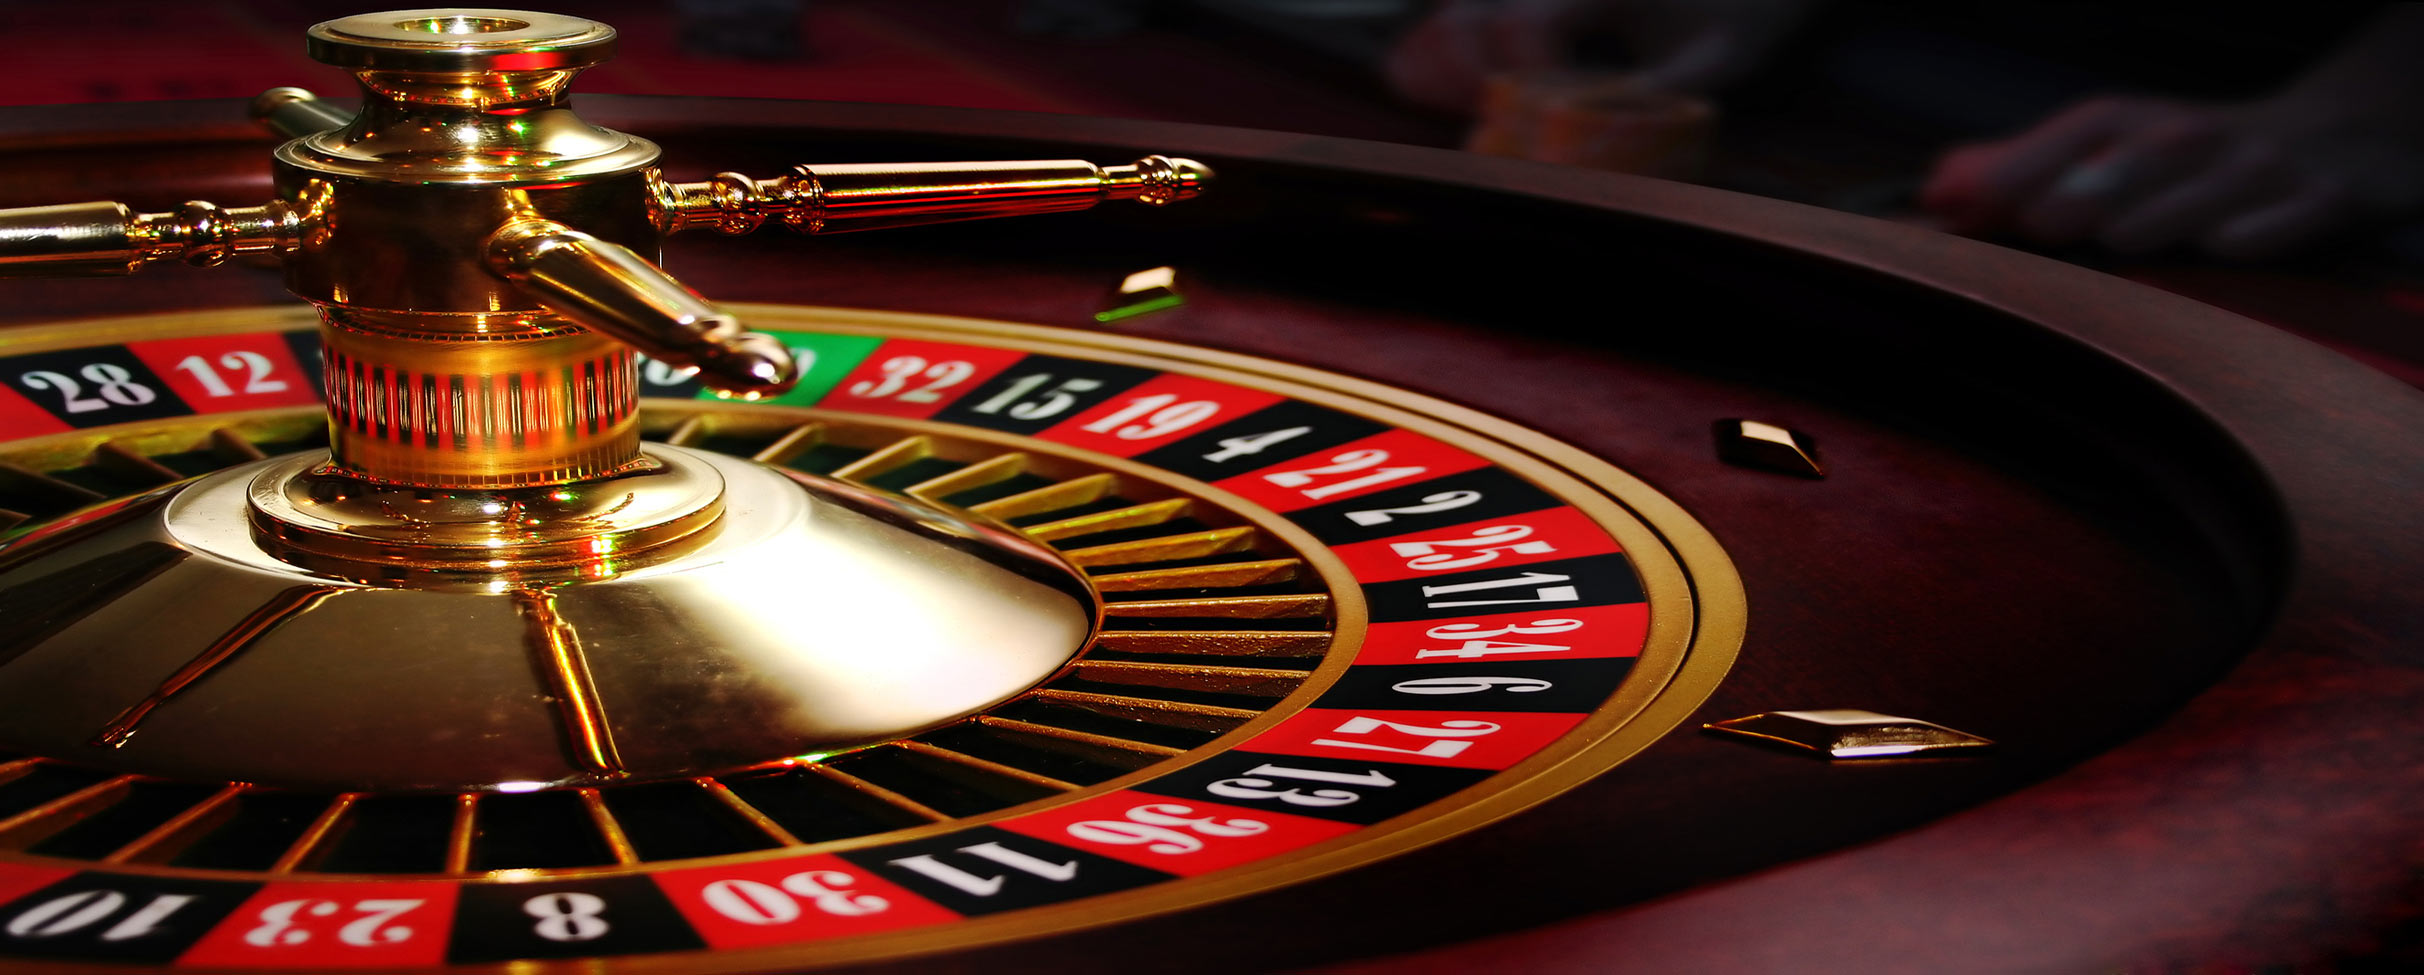 How To Play Roulette – Table Games Made Easy